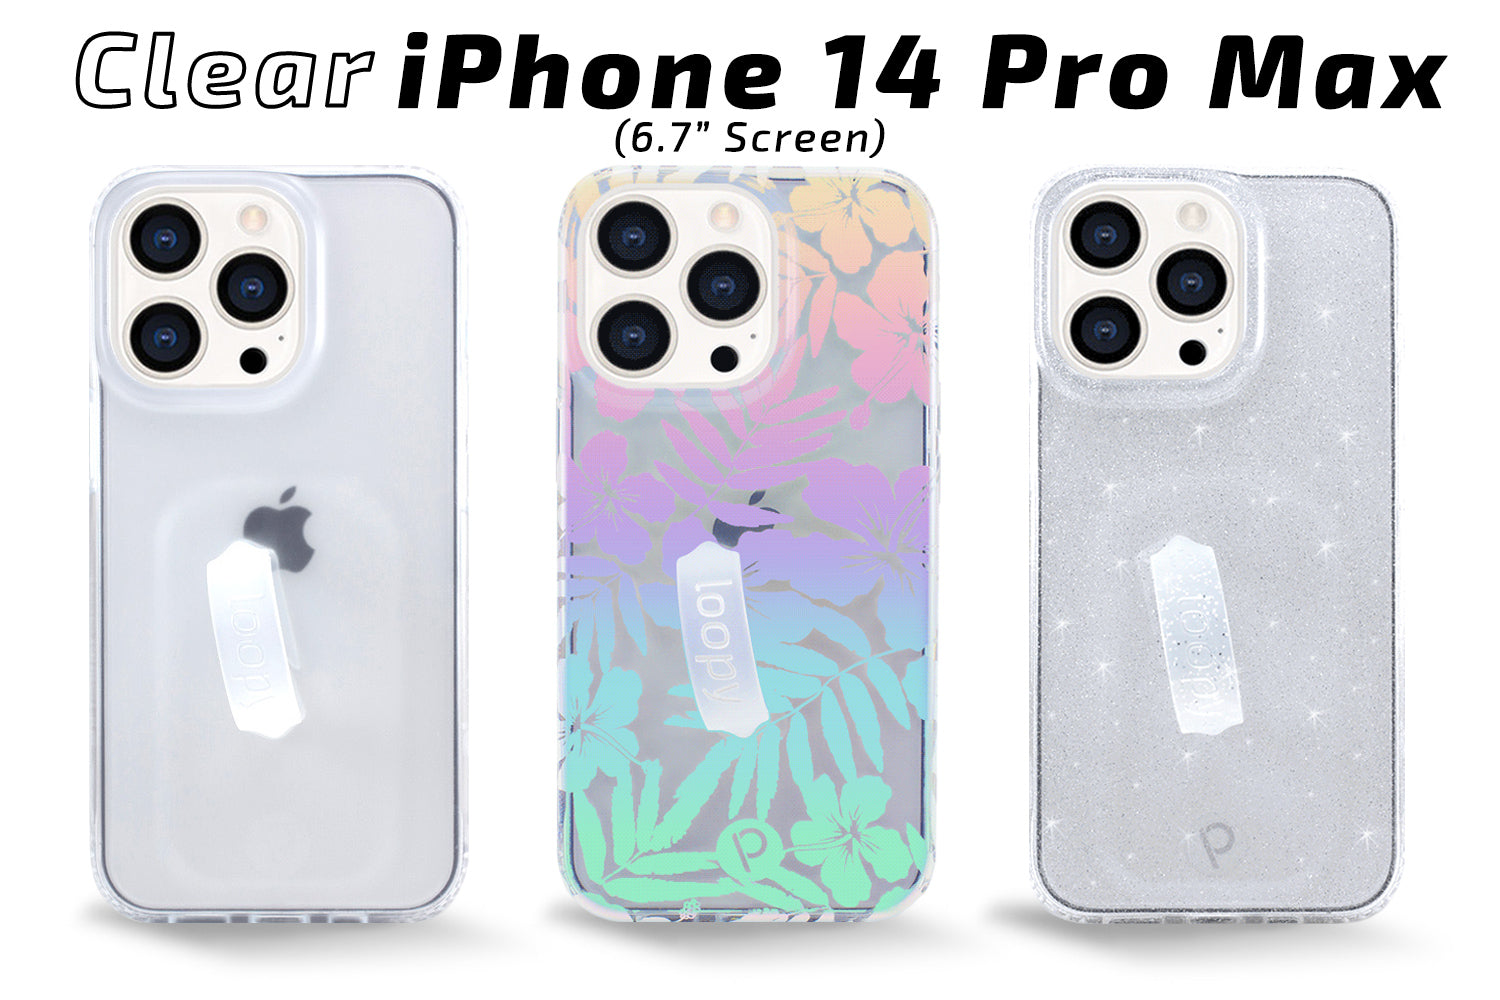 Best iPhone 12 Pro Max Case, Loopy Cases